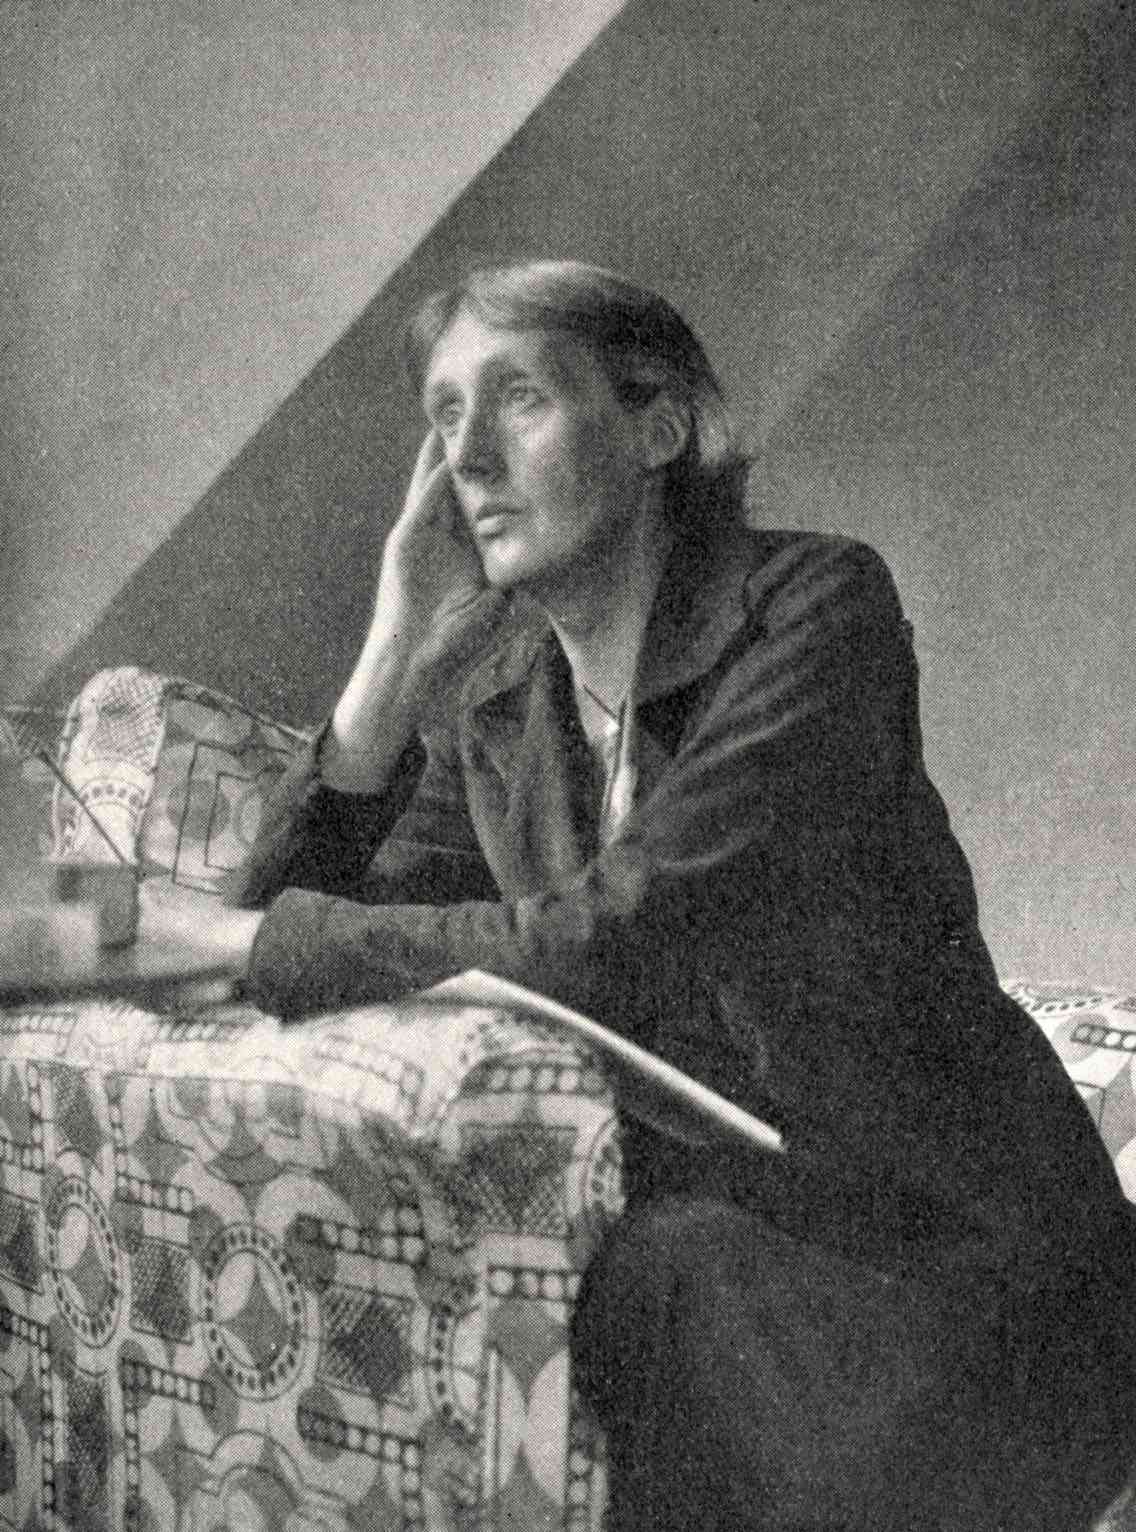 Virginia Woolf faced controversies